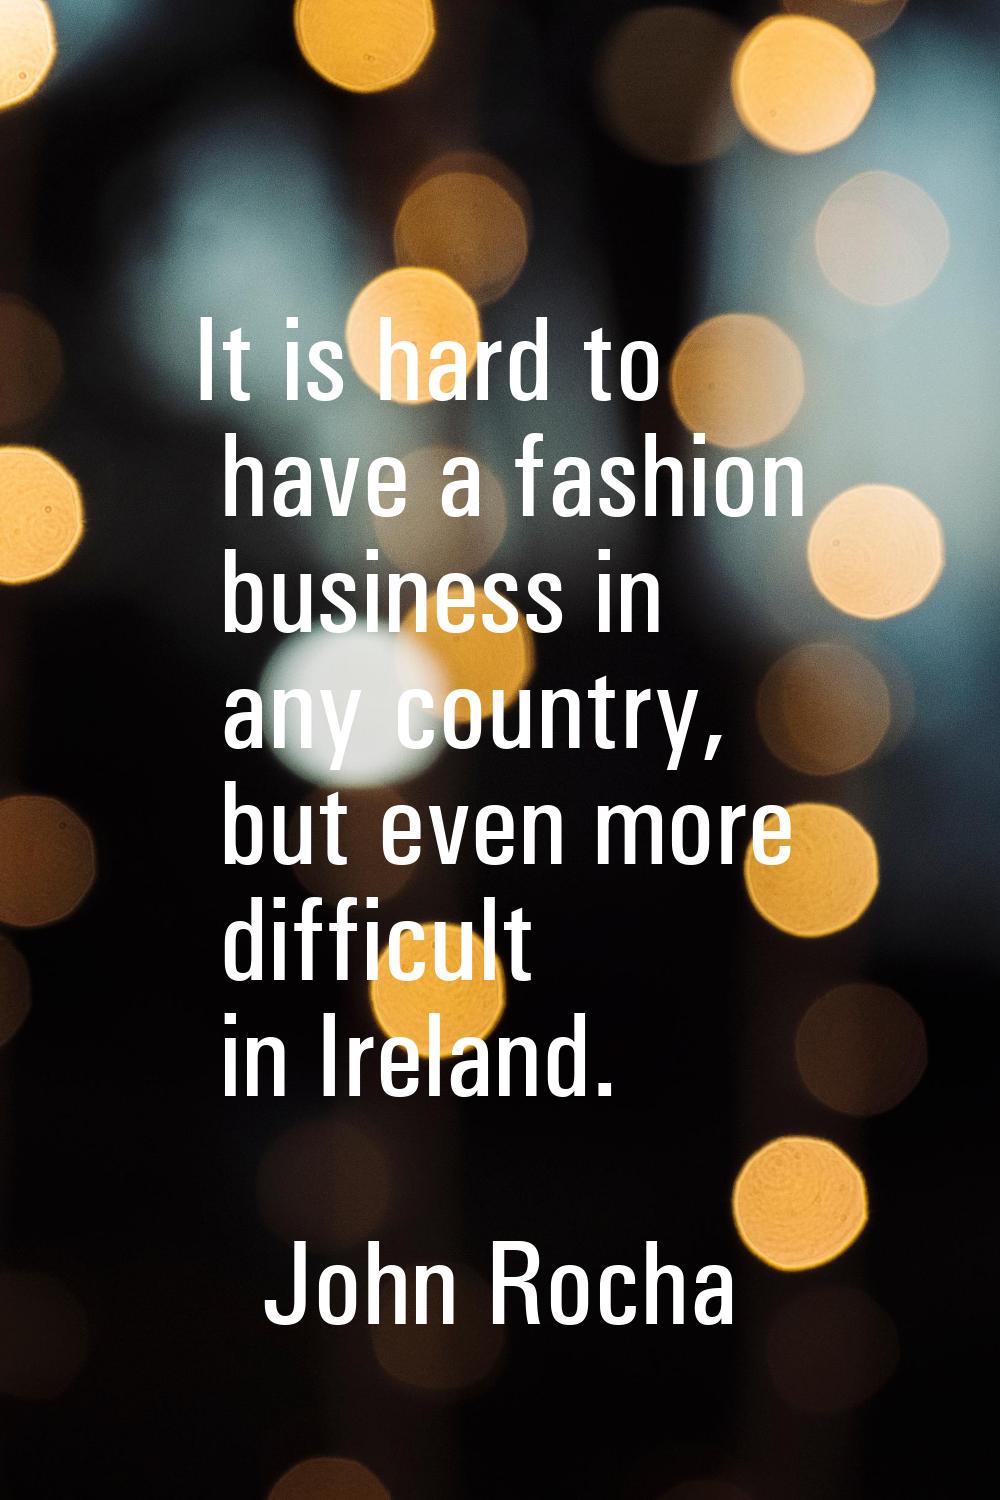 It is hard to have a fashion business in any country, but even more difficult in Ireland.